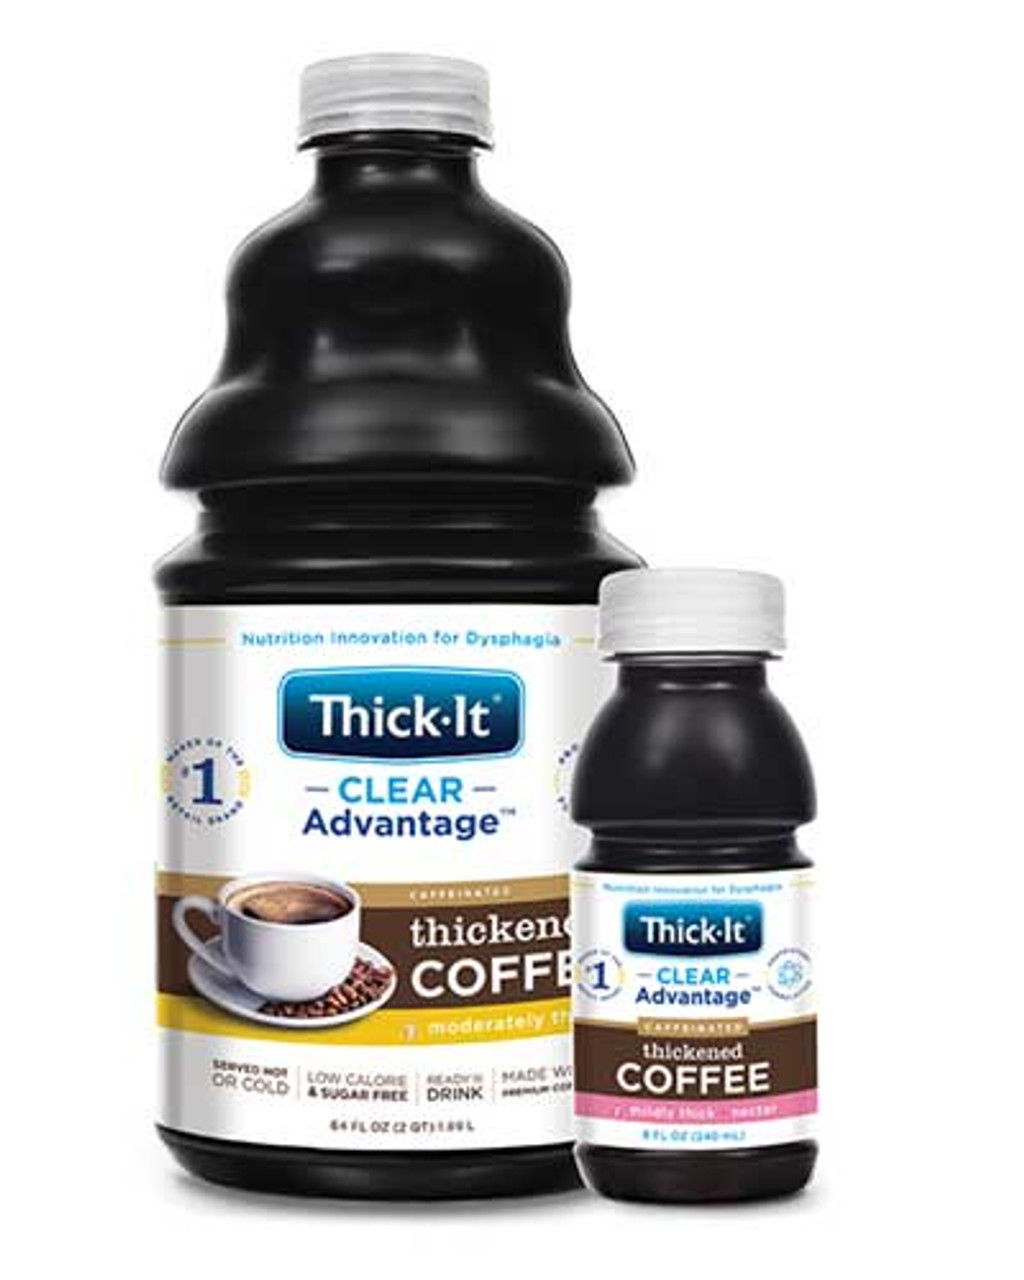 Thick-it B471 Clear Advantage Thickened Coffee Regular - Moderately Thick (Honey) 236ml x 24/case